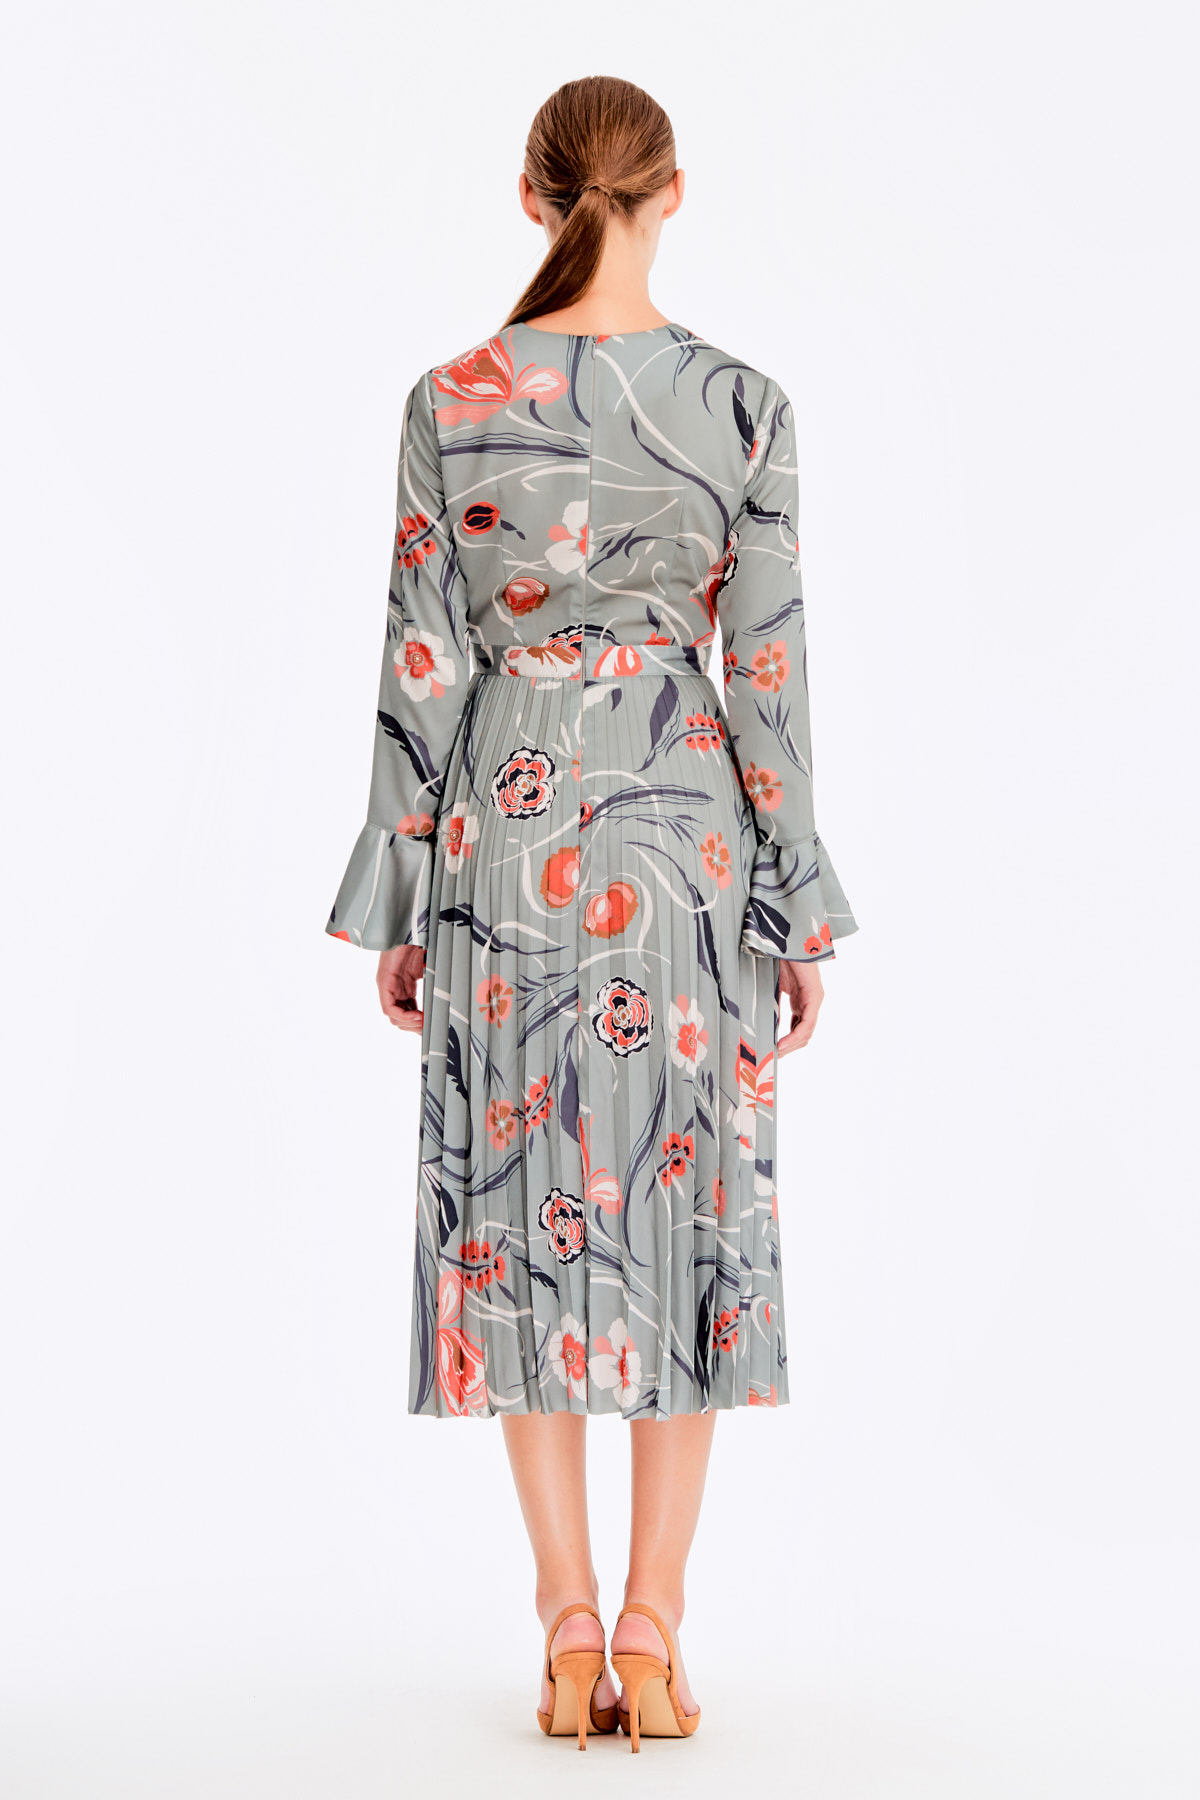 Grey dress with a floral print and a pleated skirt, photo 7